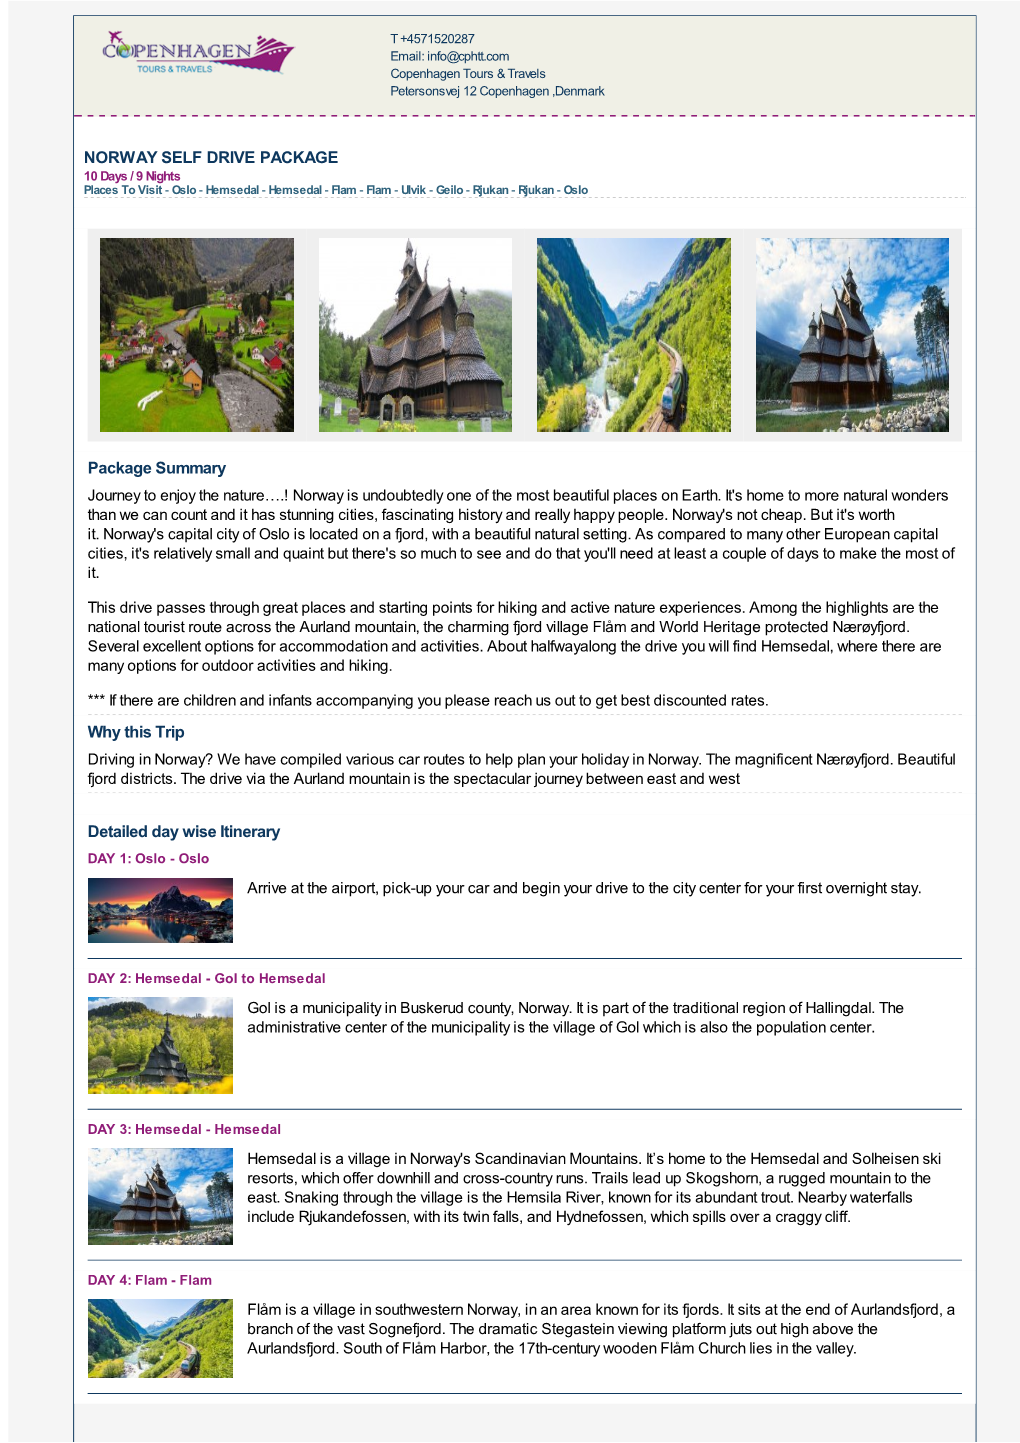 NORWAY SELF DRIVE PACKAGE Package Summary Why This Trip